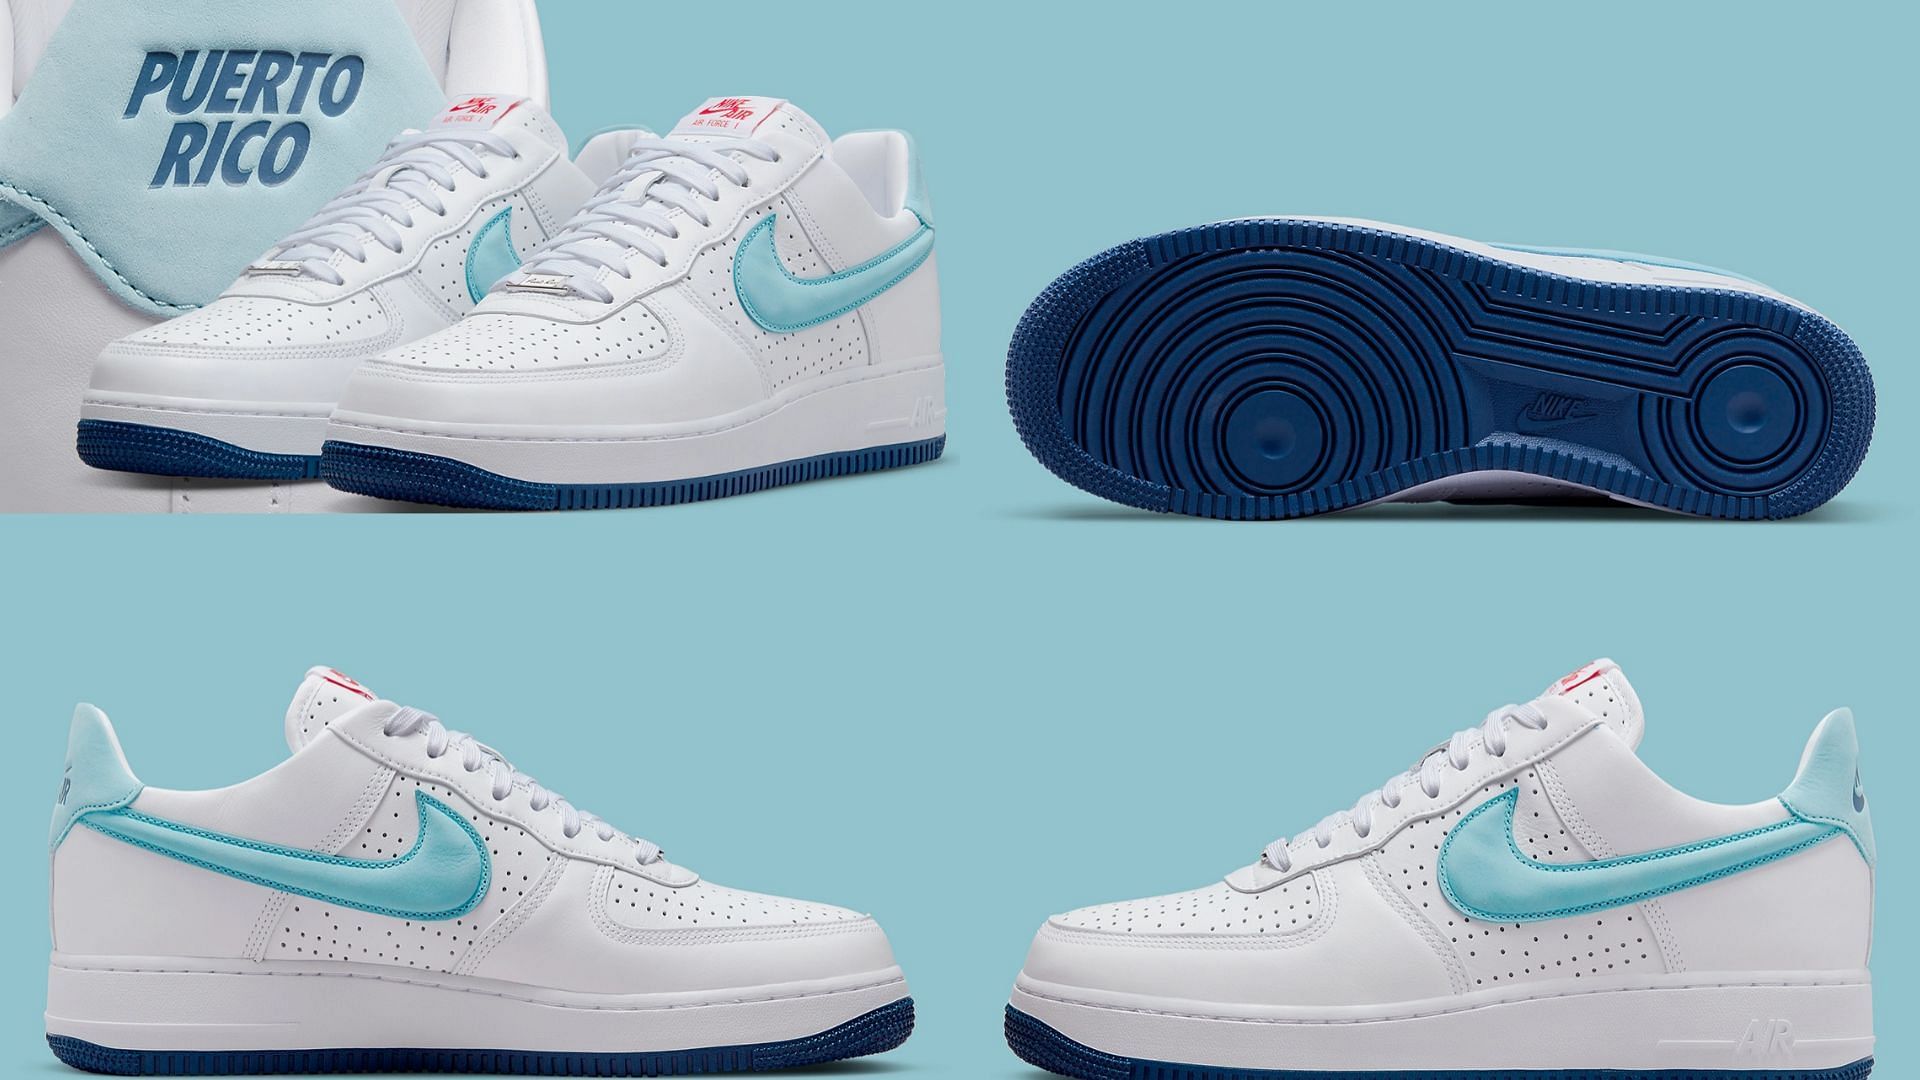 Where to buy Nike Air Force 1 Low Puerto Rico? Release date, price, and